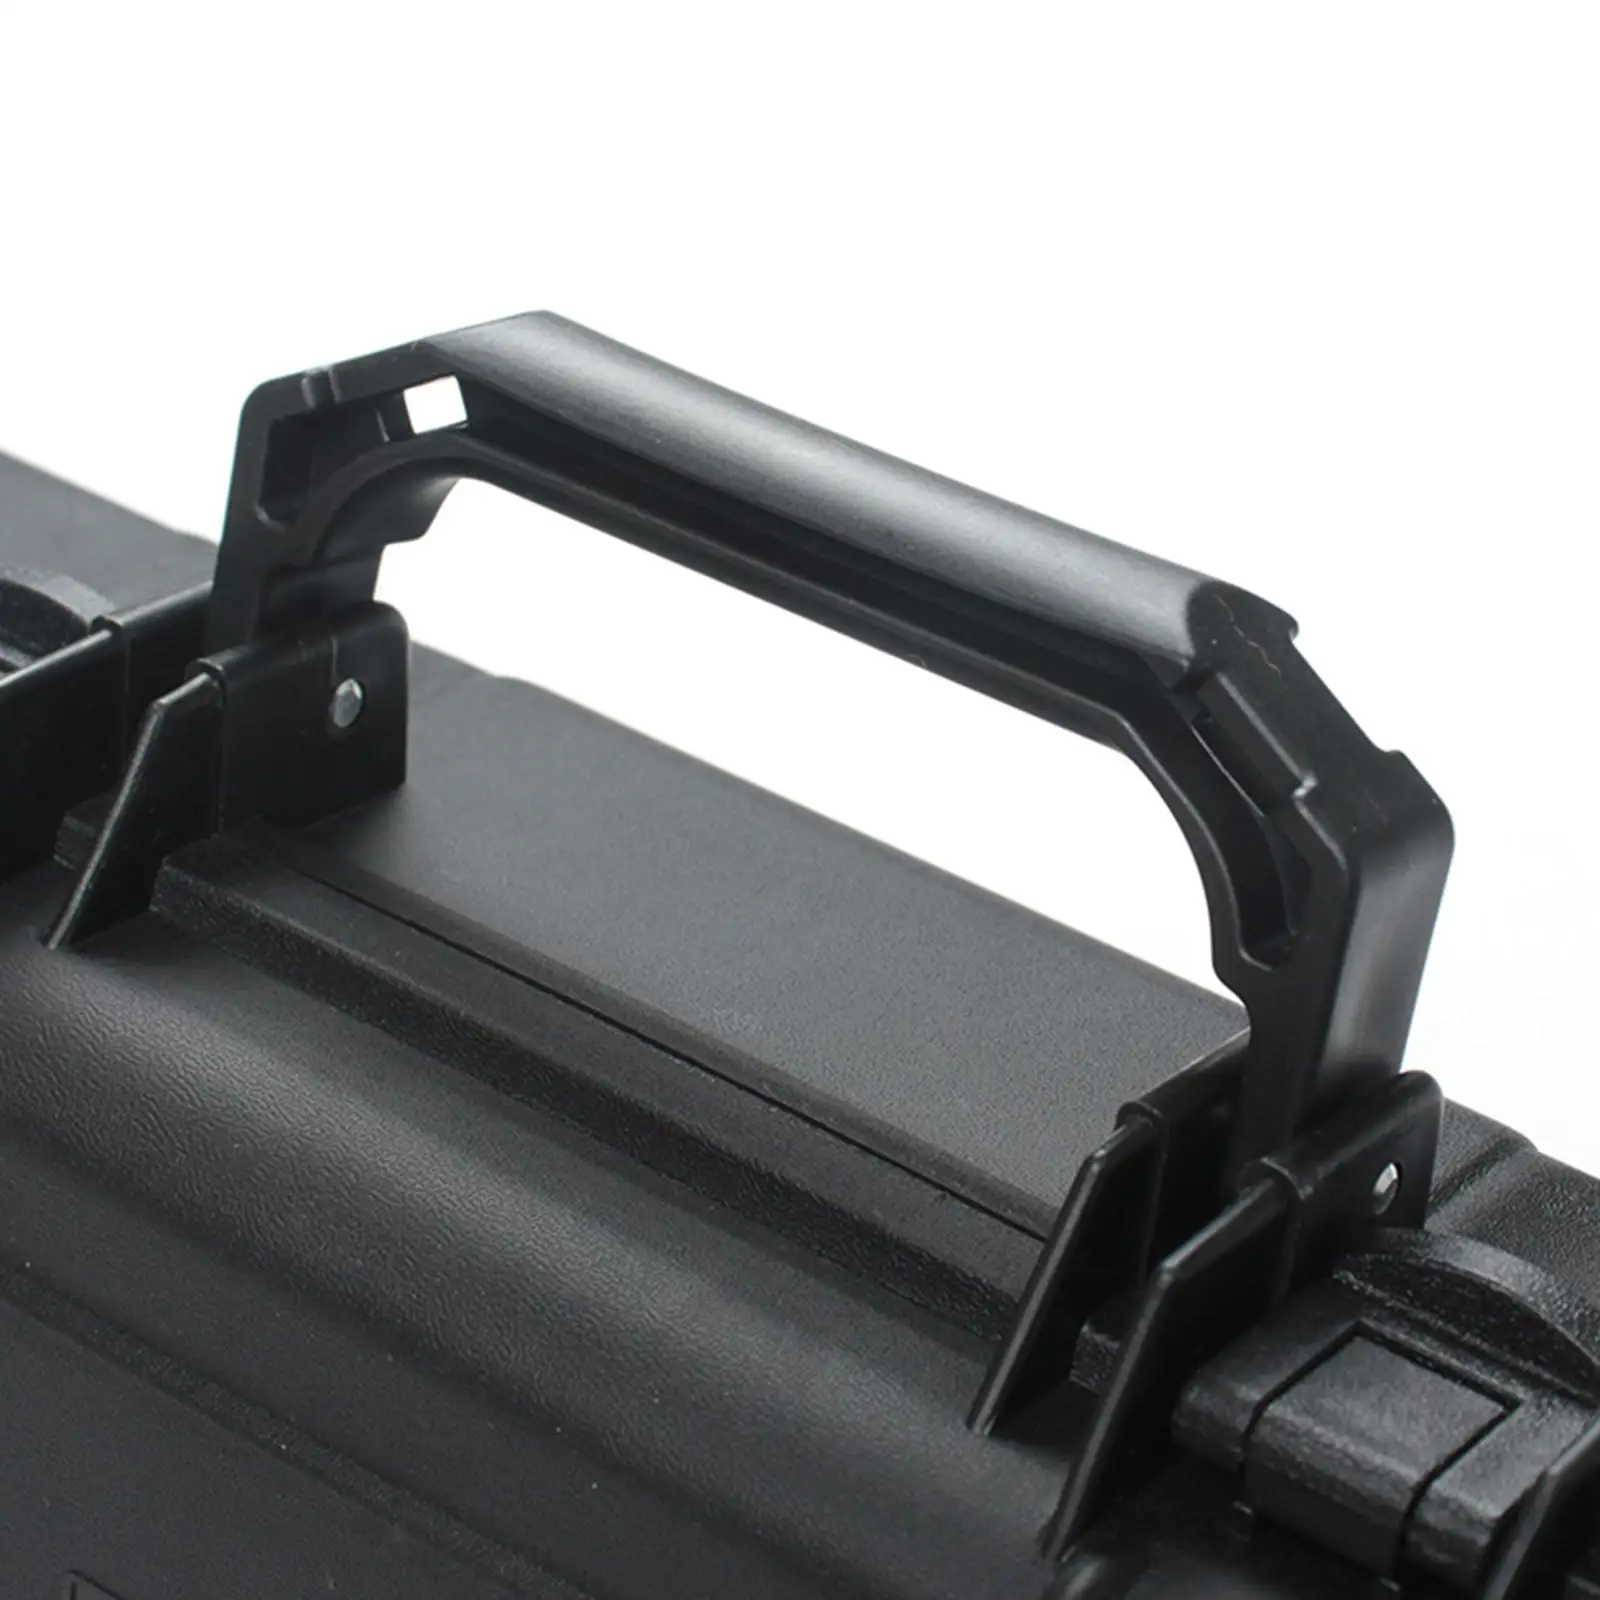 Instrument Case Impact Resistant Dustproof Safety Waterproof Portable with Pre-Cut Foam Equipment Tool Box Carrying Case